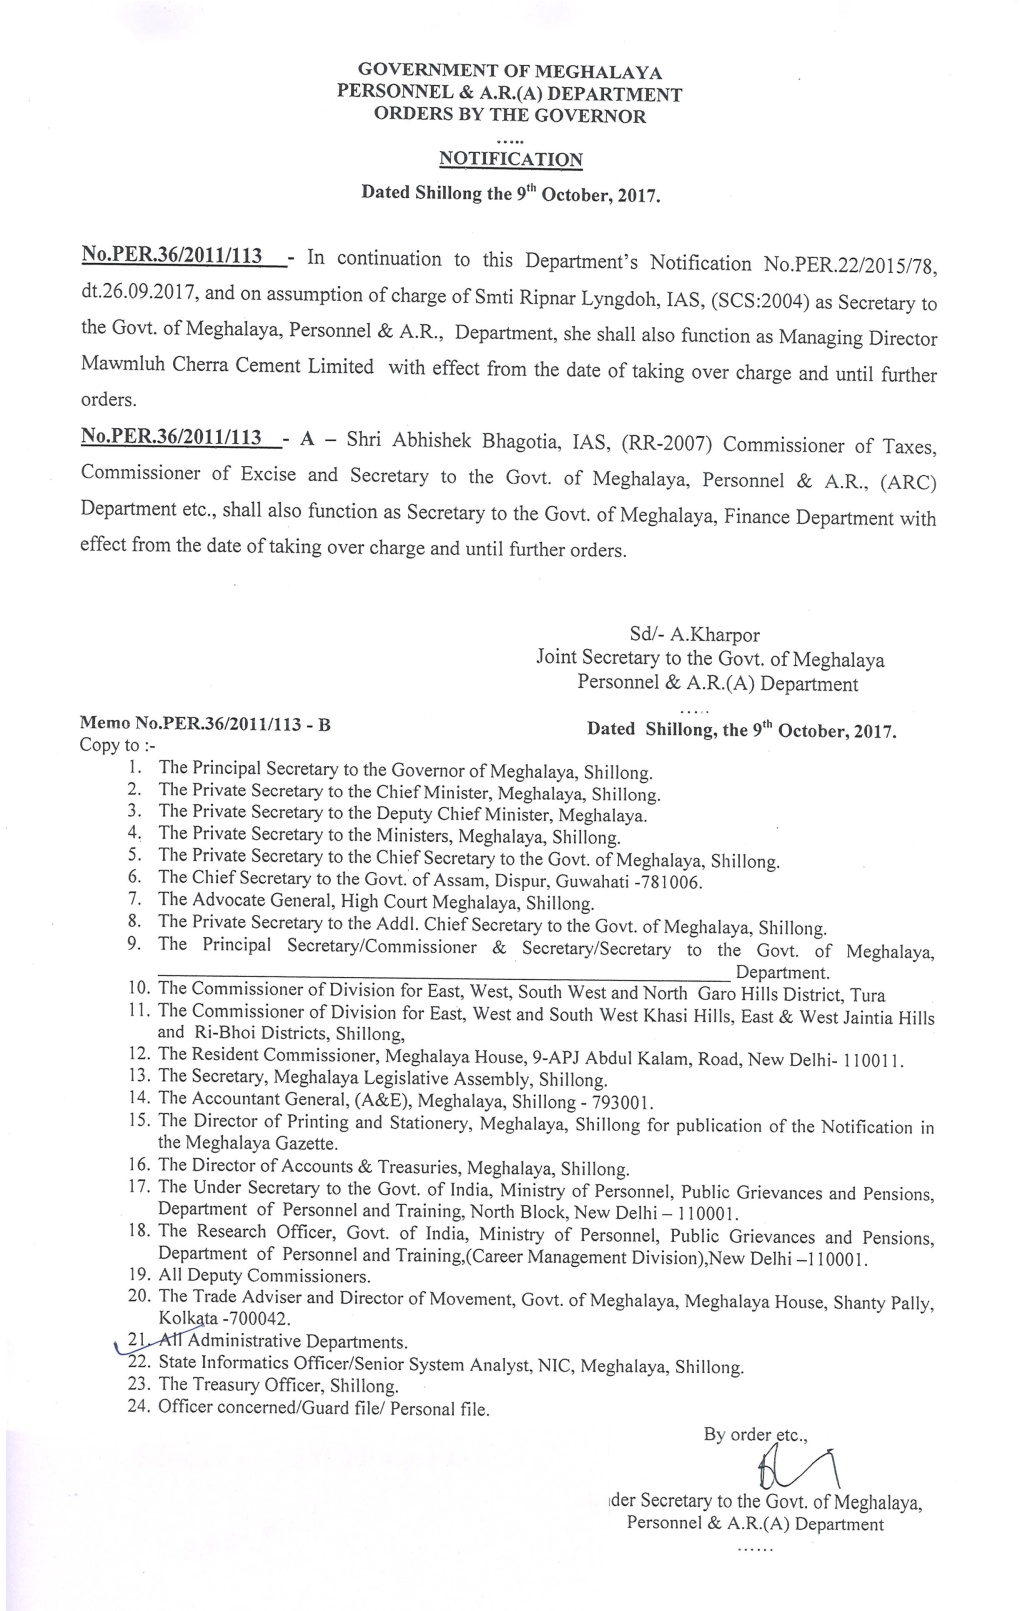 Government of Meghalaya Personnel & A.R.(A) Department Orders by the Governor